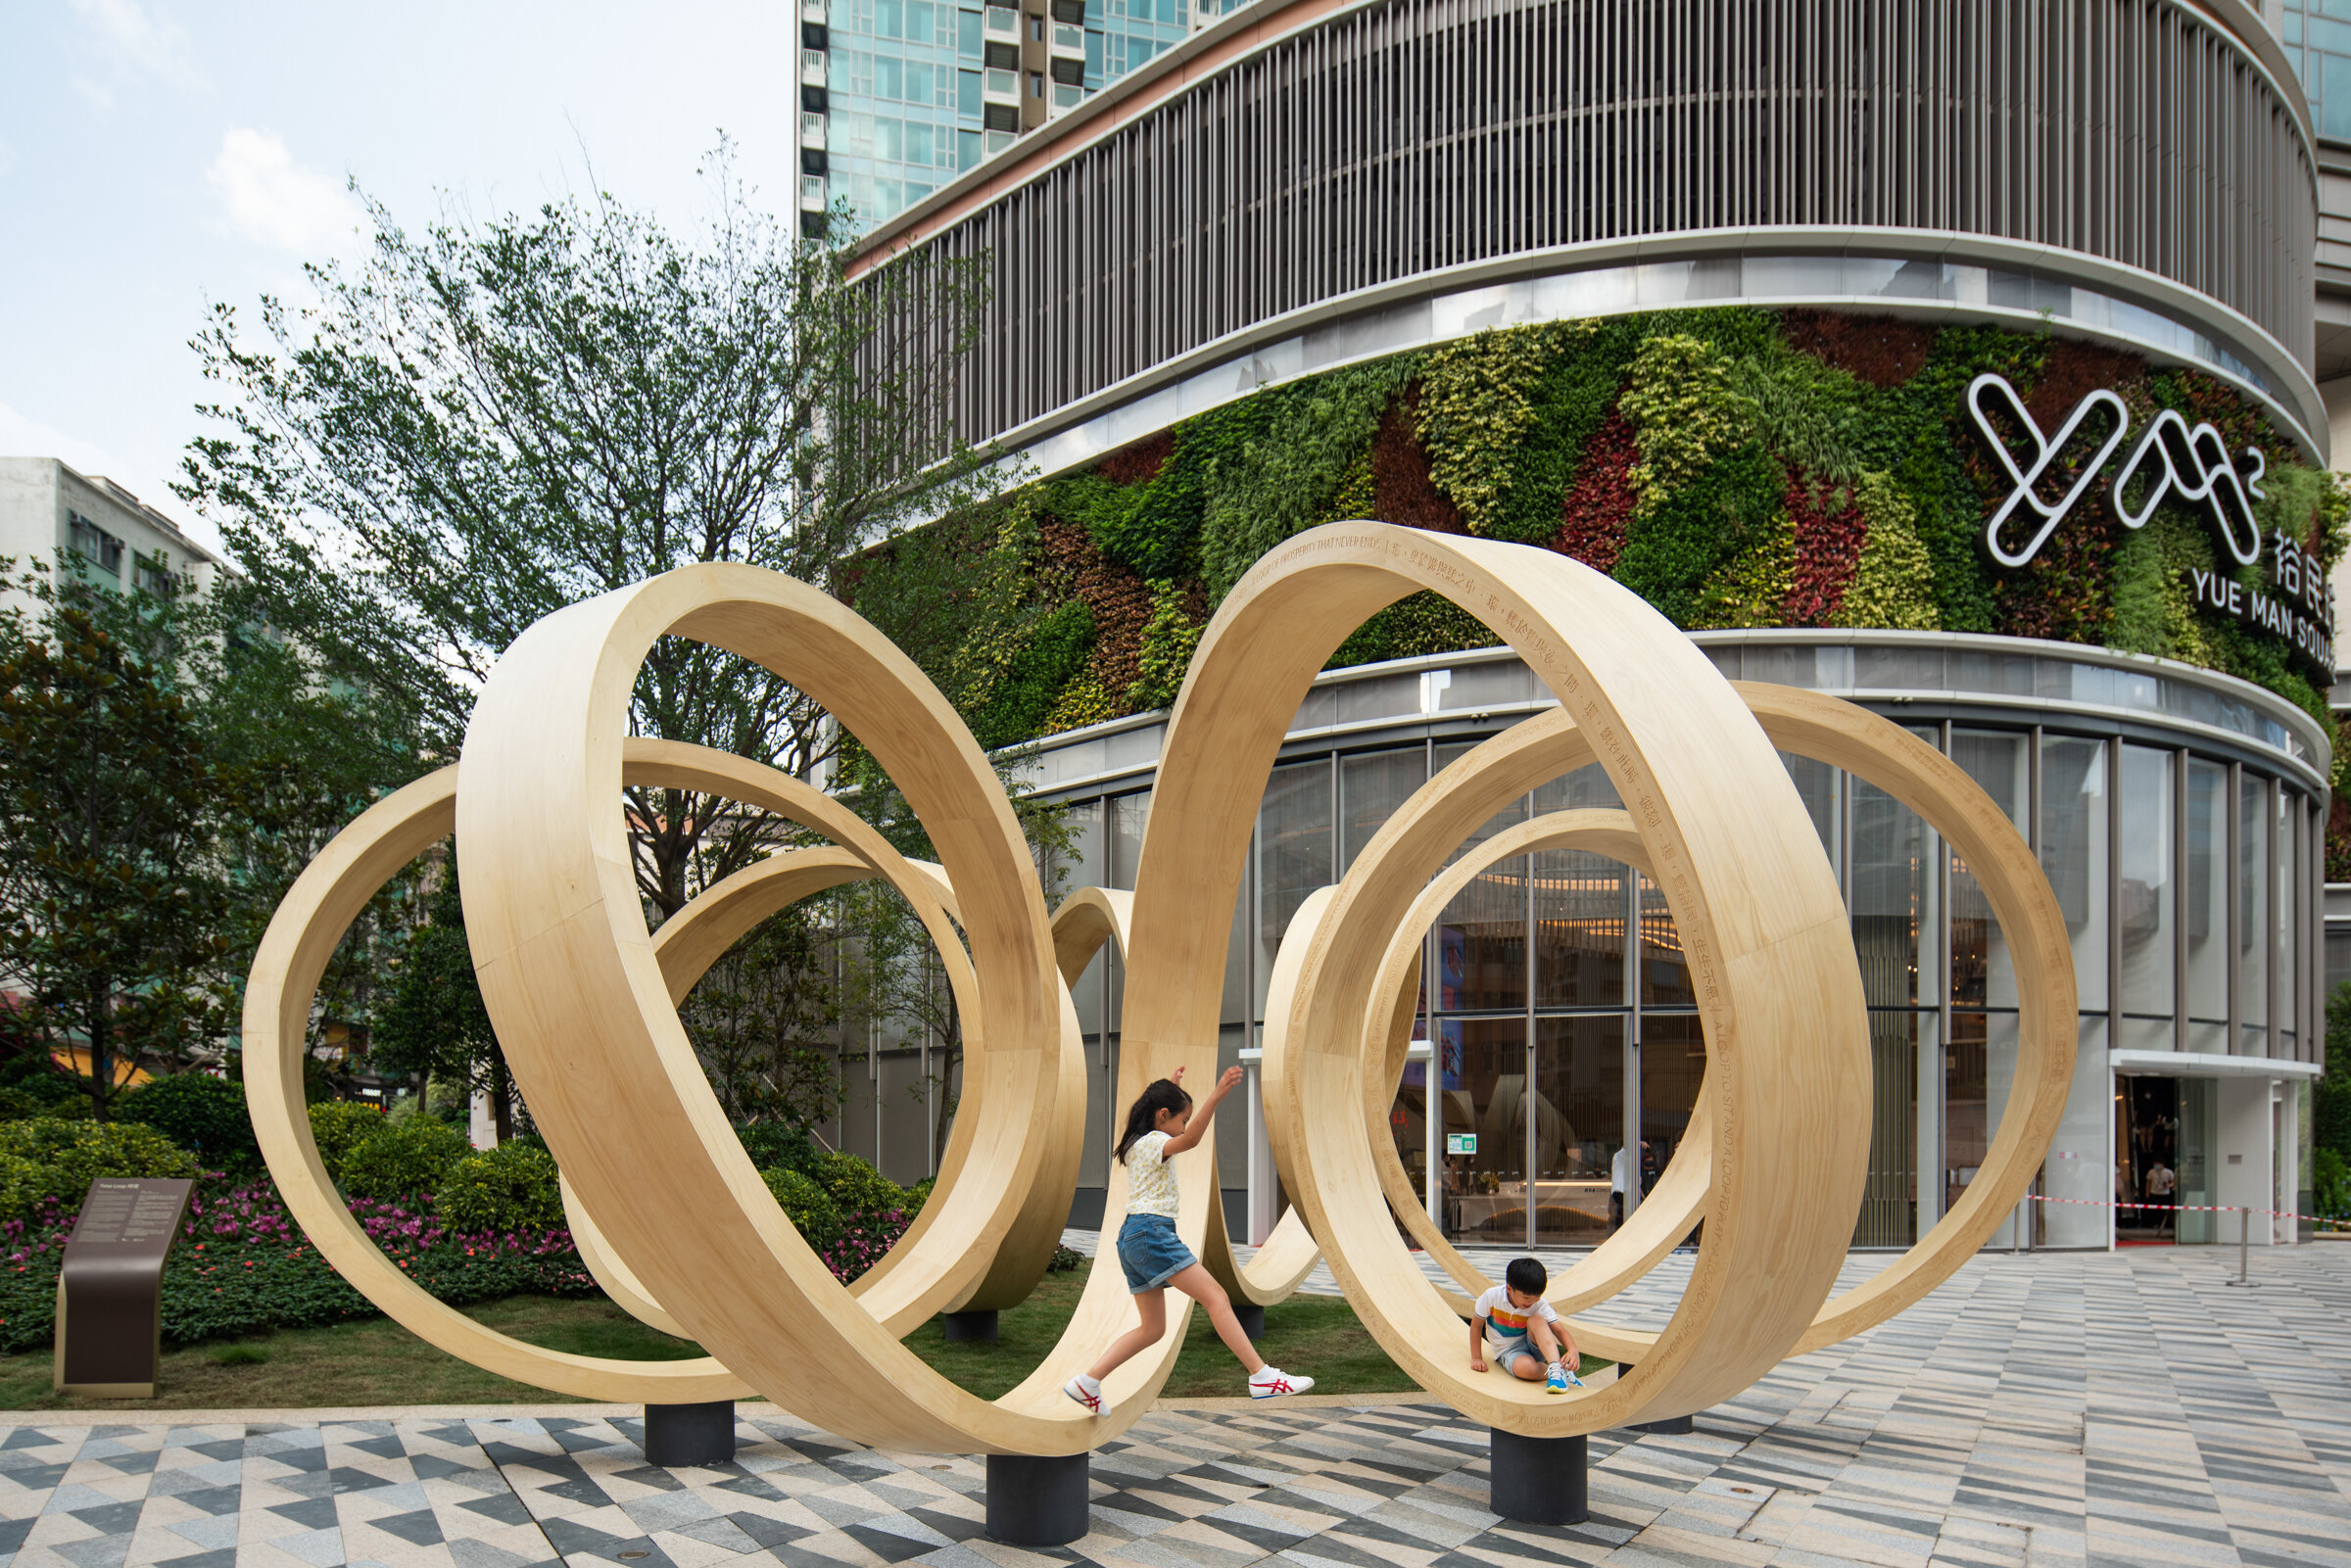  Time Loop Yue Man Square, Kwun Tong  Designed by Paul Cocksedge Studio for Sino Group 